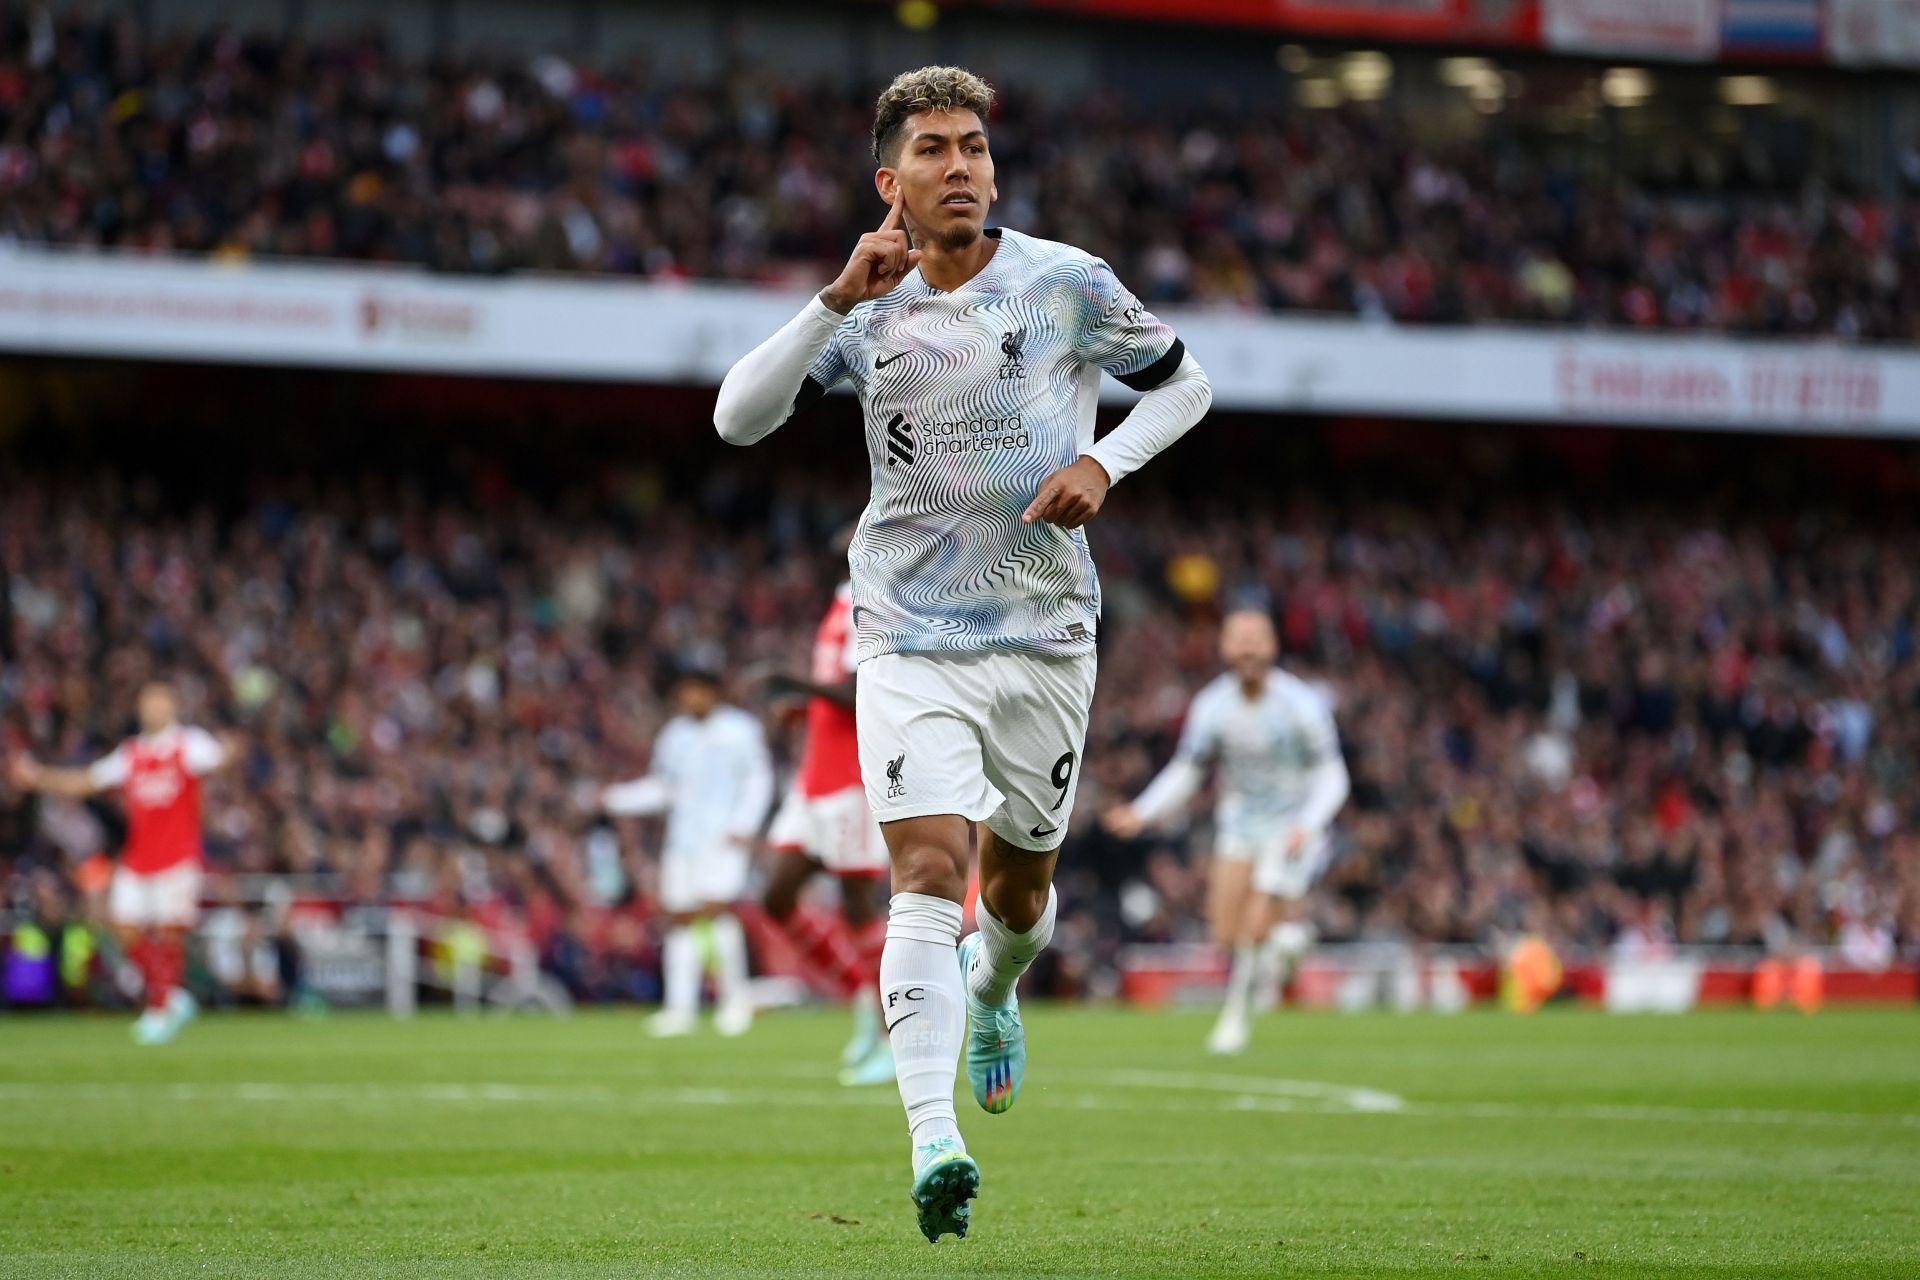 Firmino has scored the most goals by a Liverpool player this season